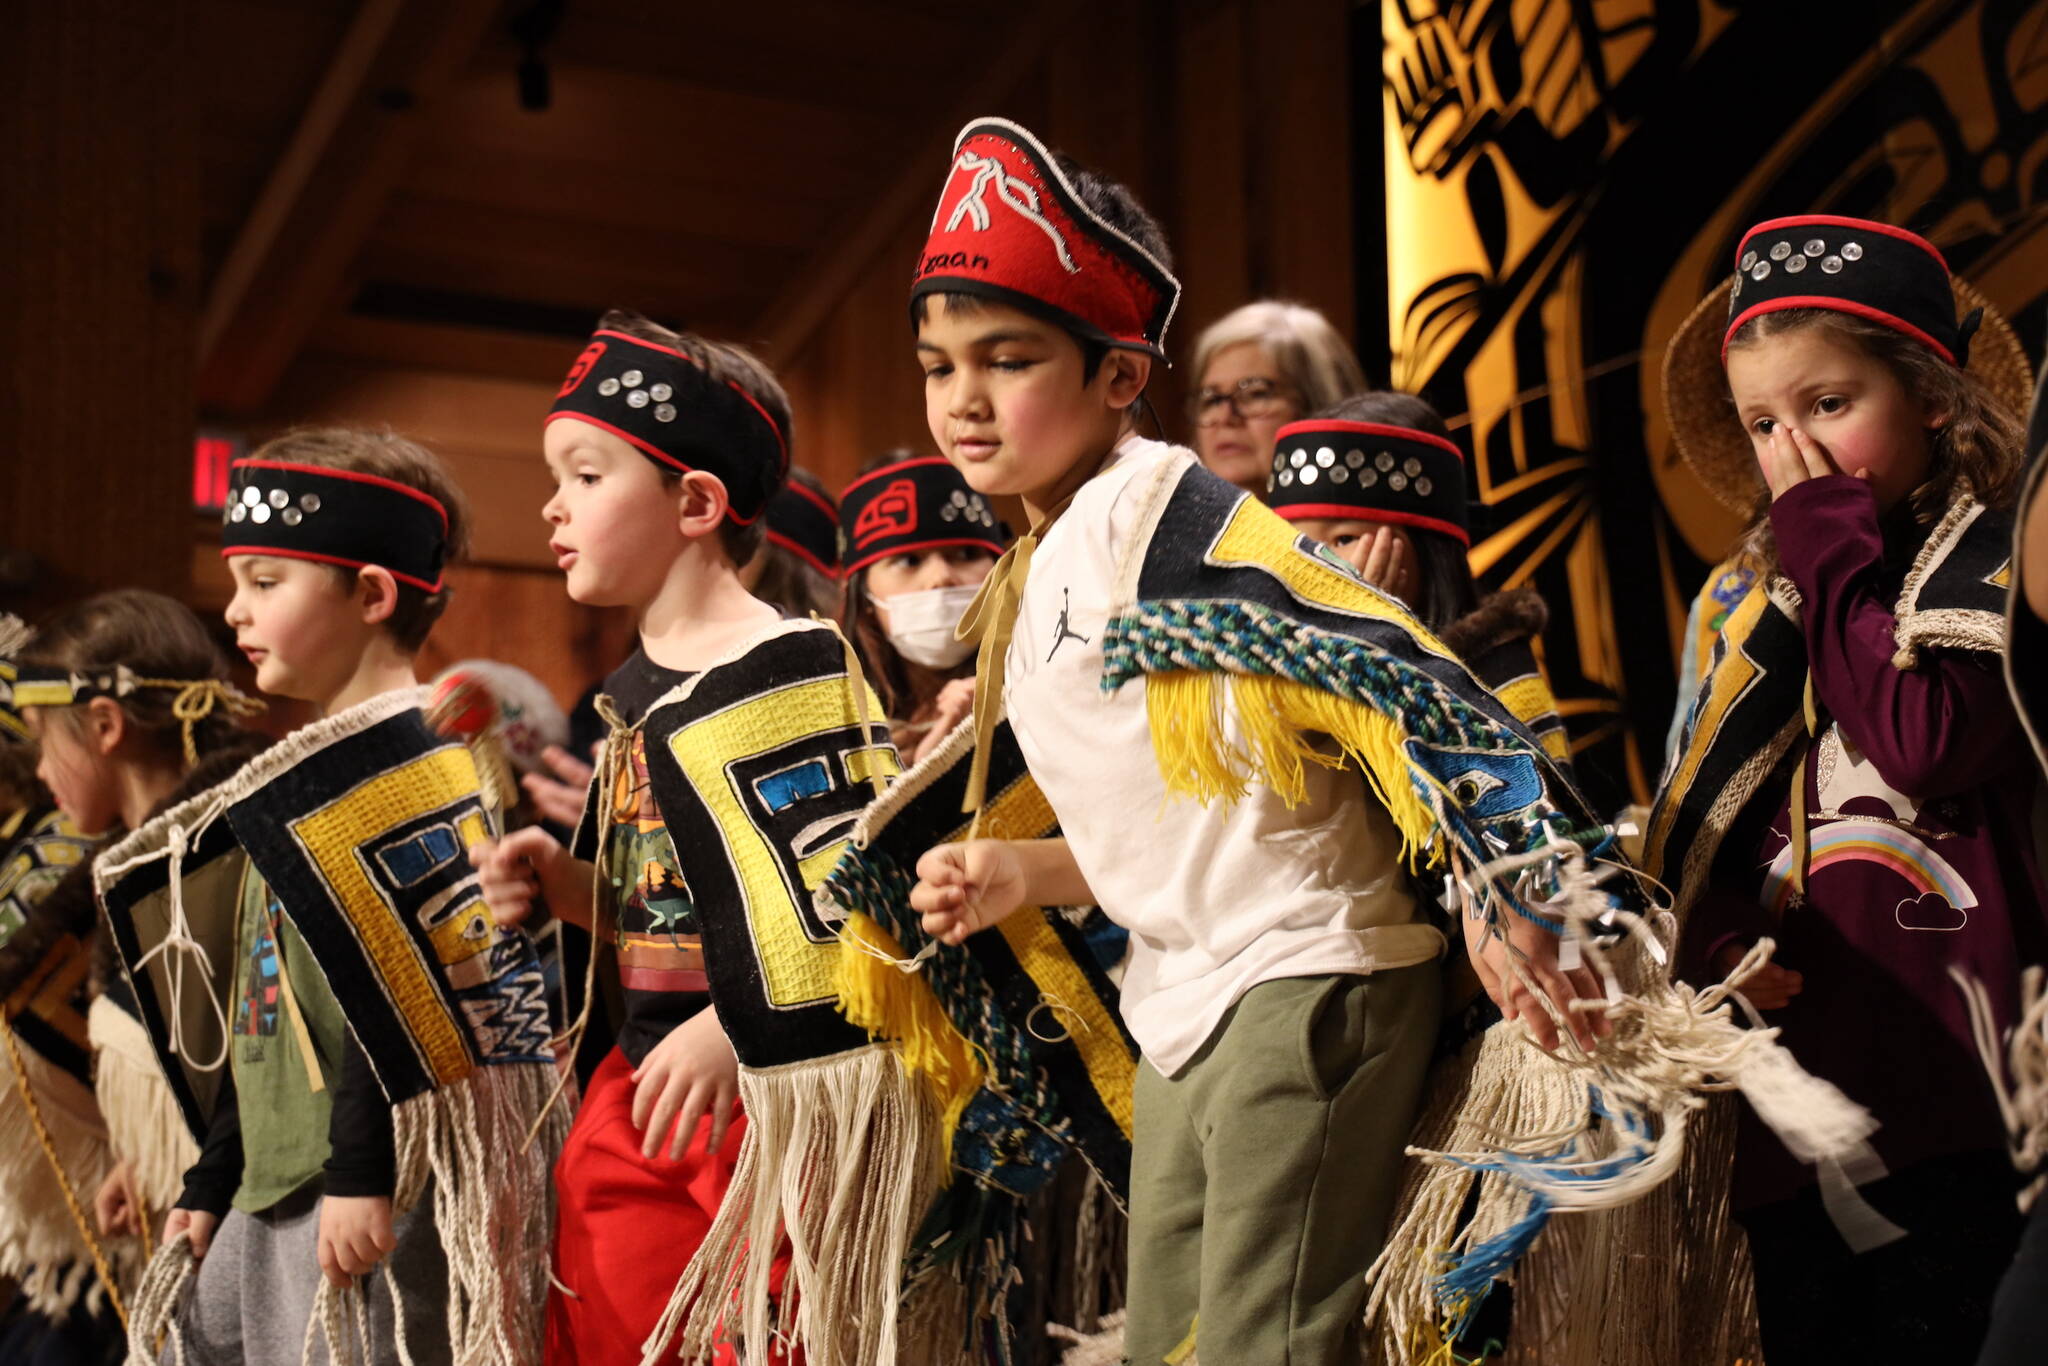 Clarise Larson / Juneau Empire
Young students from the Tlingit Culture Language and Literacy program at Harborview Elementary School dance on stage Wednesday afternoon during a dancing-of-the-robes ceremony for over a dozen Chilkat robes that were weaved by student weavers who participated in a more than two-year-long apprenticeship to learn the craft.